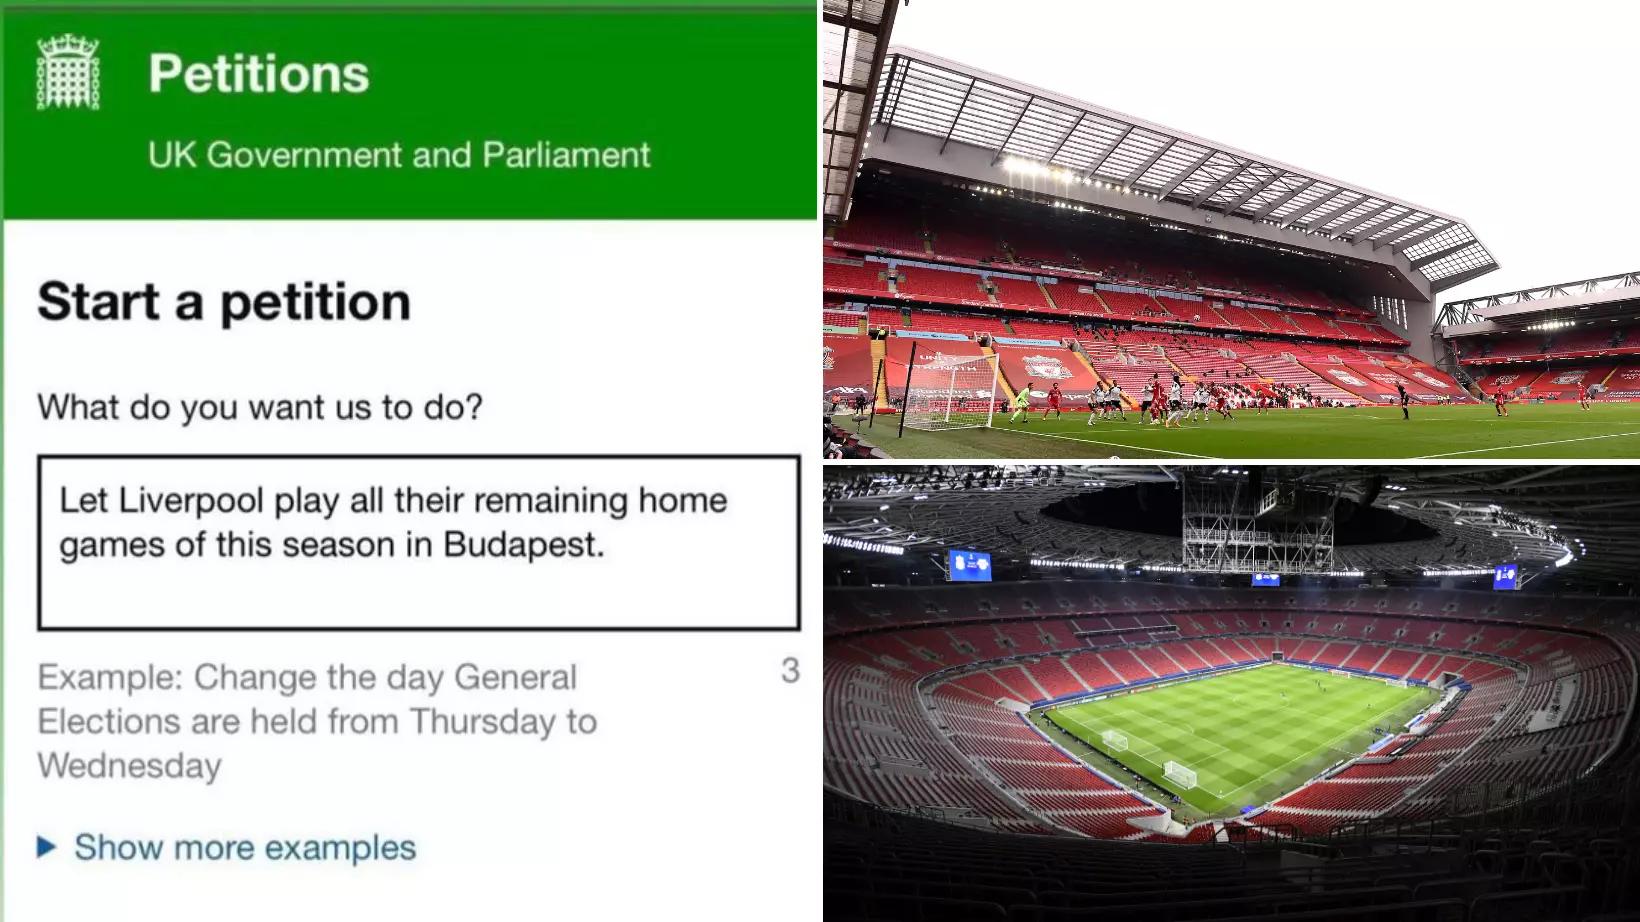 Liverpool Fans Want To Play Their Remaining Home Games At The Puskas Arena Instead Of Anfield